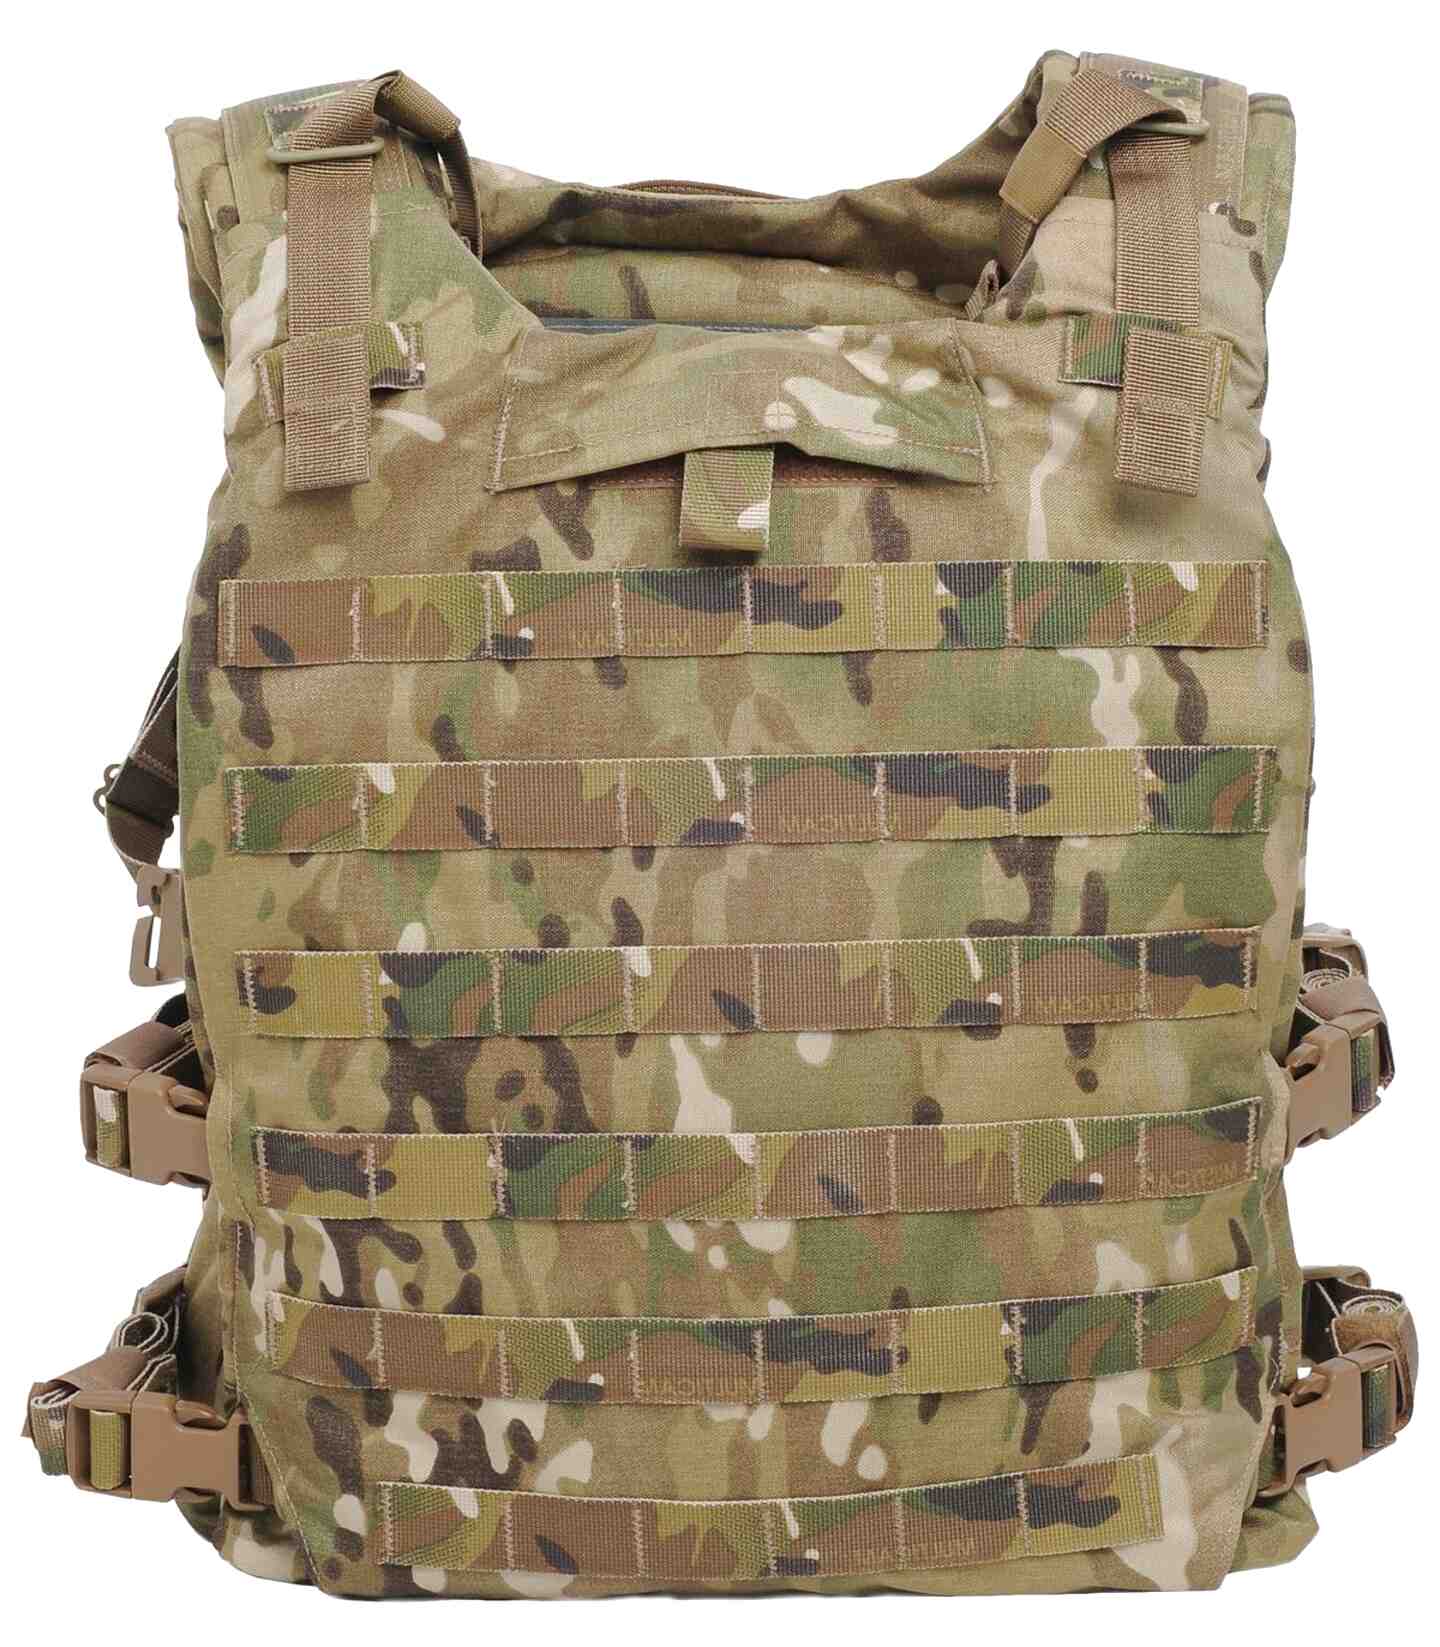 What Plate Carriers Are Authorized In The Army - Army Military